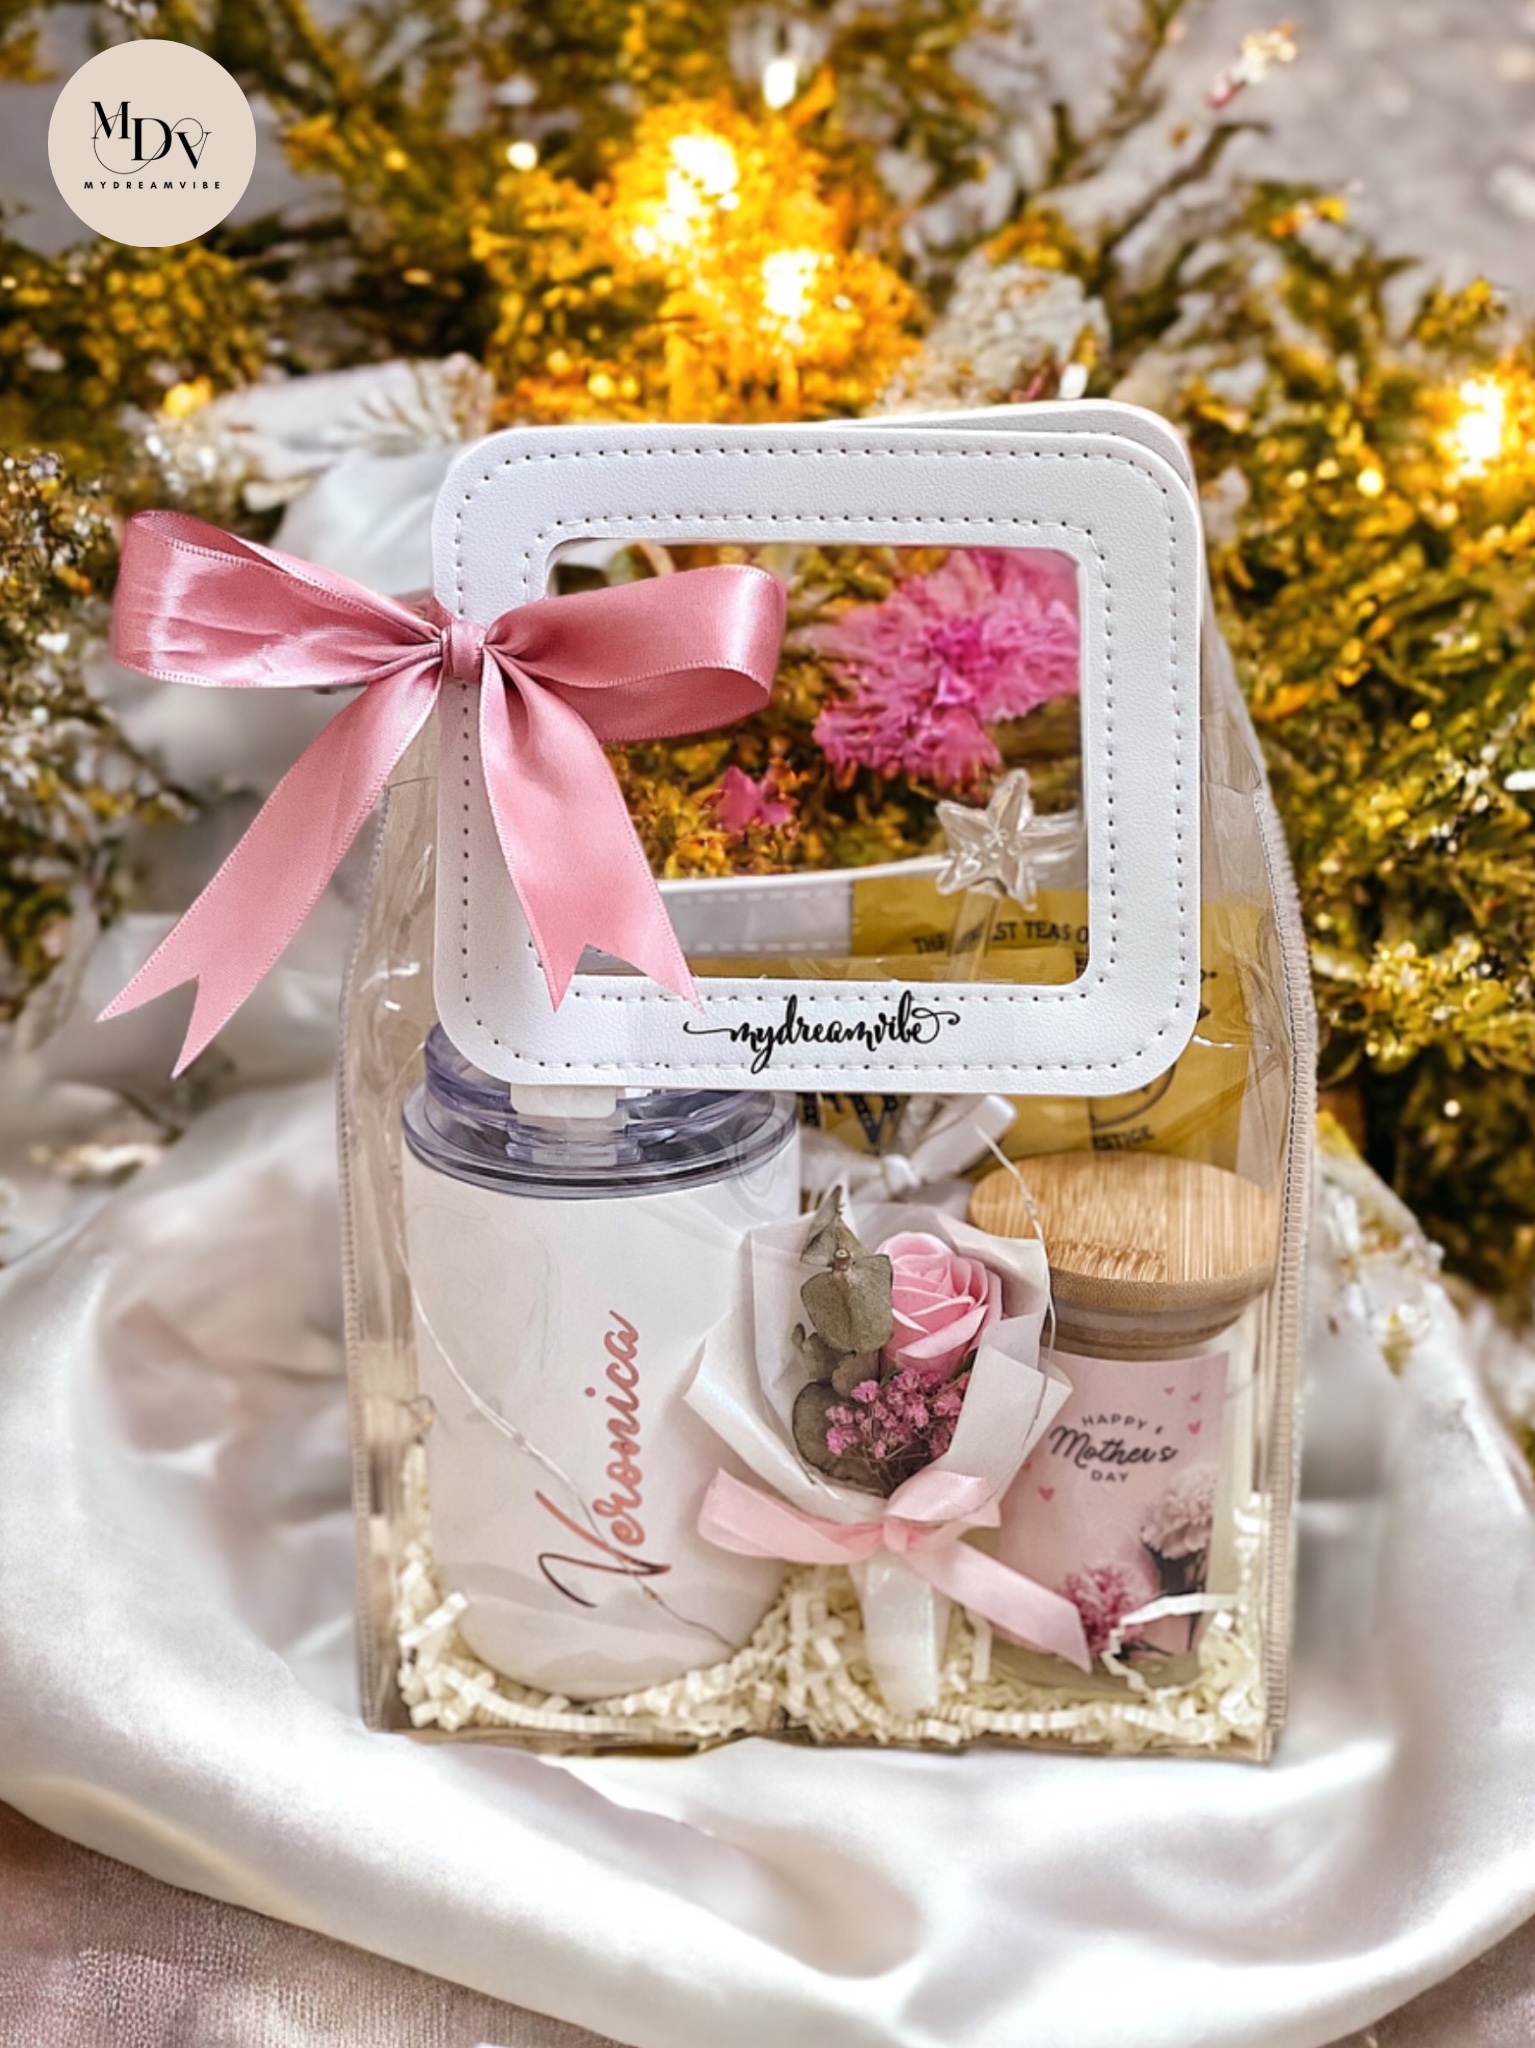 "Star of the Day" Mum, You're my Best Tea (Bestie)! - Mother's Day Gift Set